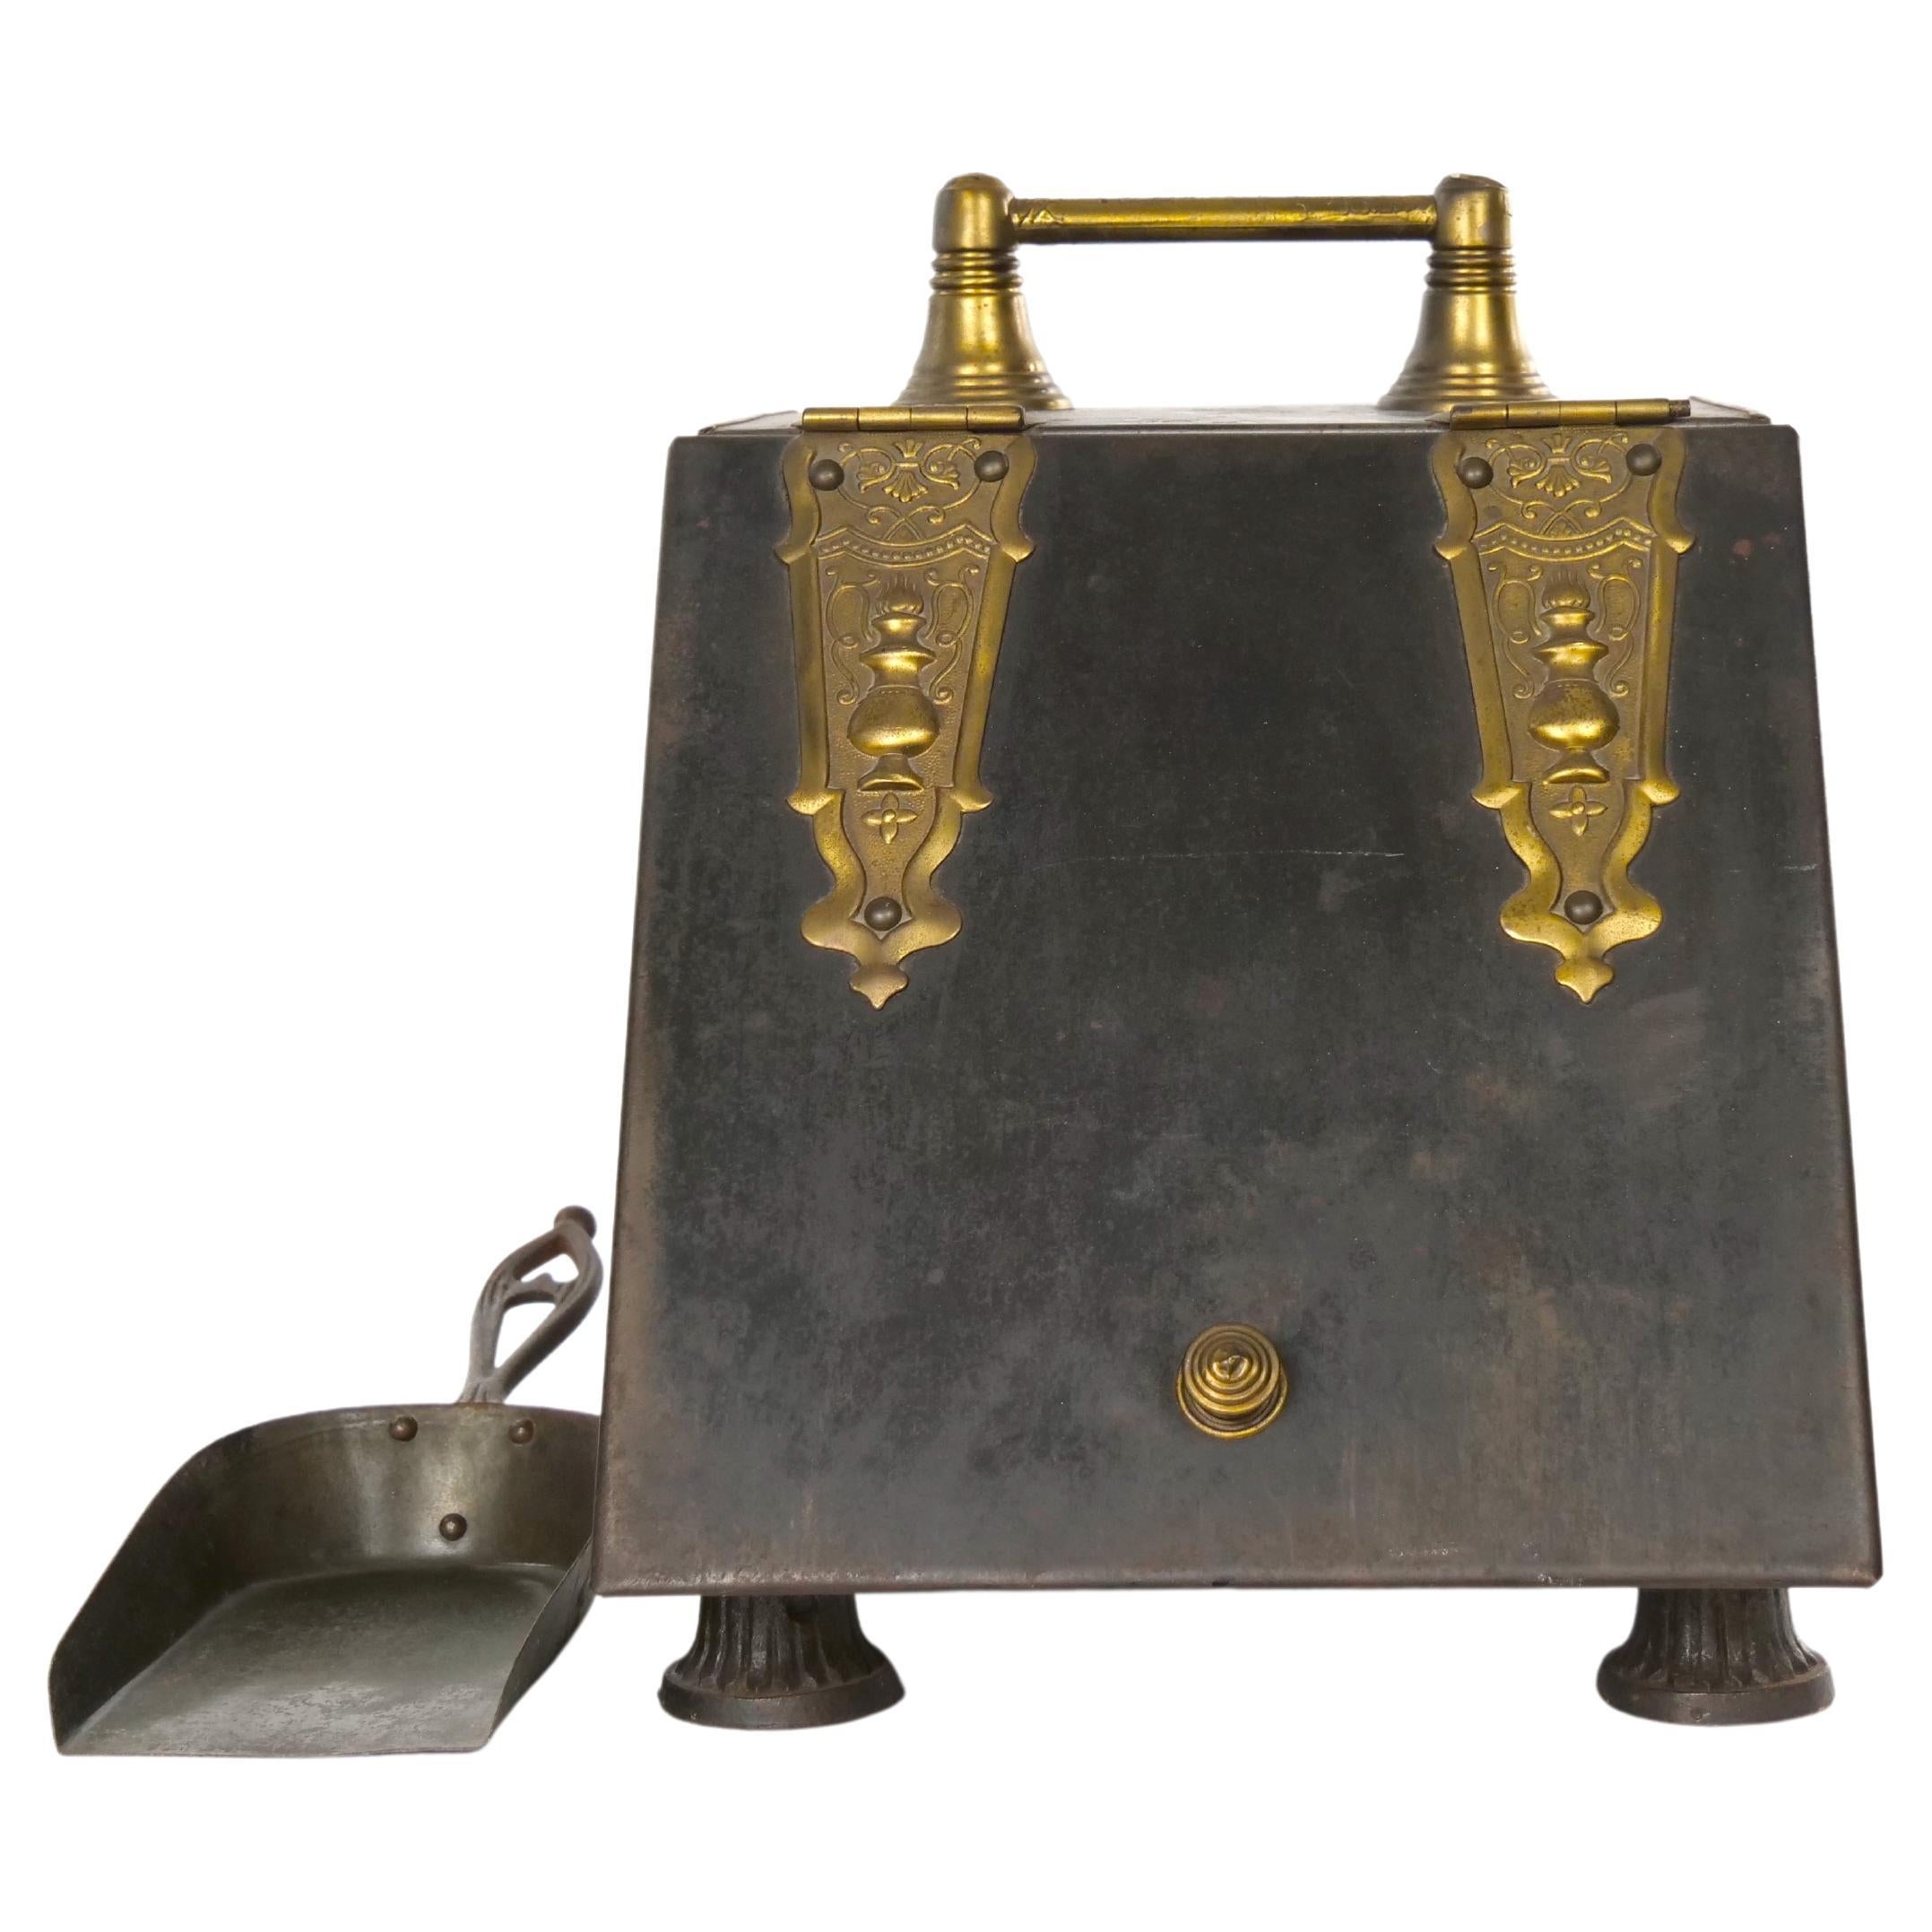 Antique Victorian beautiful brass / Iron footed fireplace coal bucket scuttle. The bucket features an embossed lift up lid opening to reveal a storage compartment for coal, beautiful ornate brass carrying handle with a brass shovel and raised on